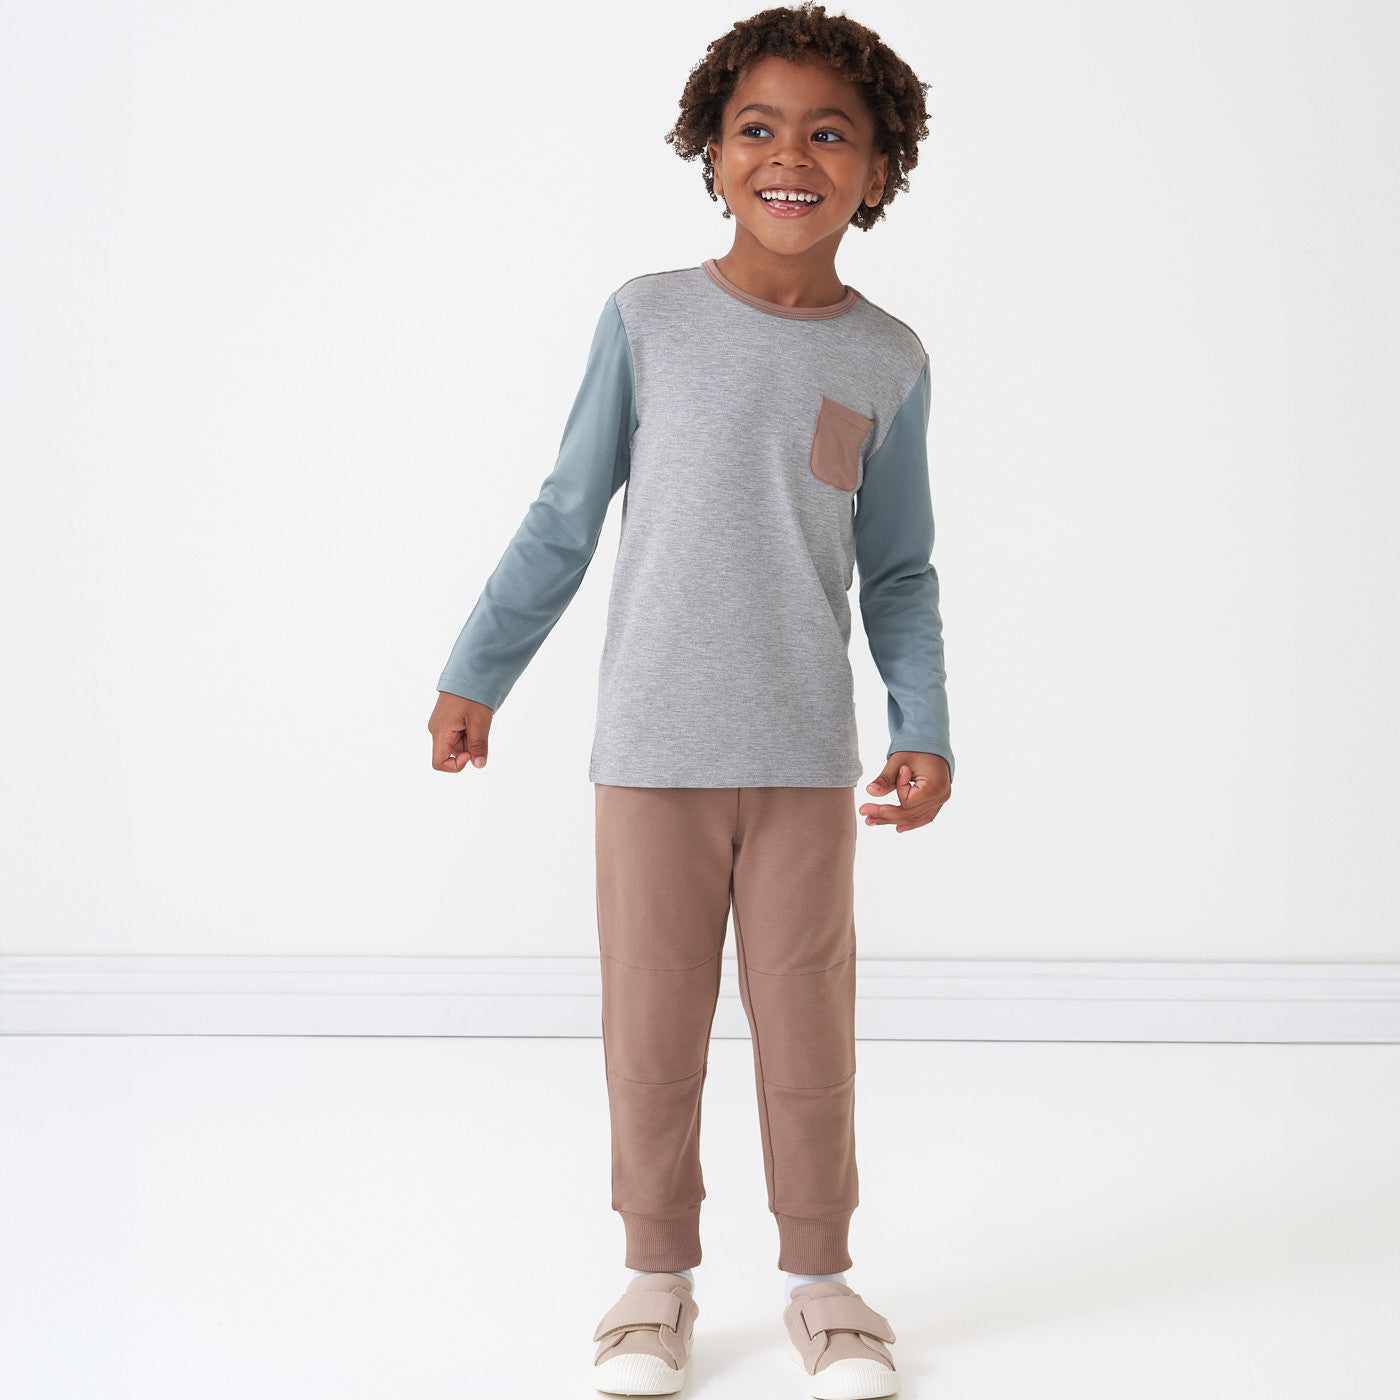 Child wearing a Colorblock Pocket tee paired with Light Cocoa joggers